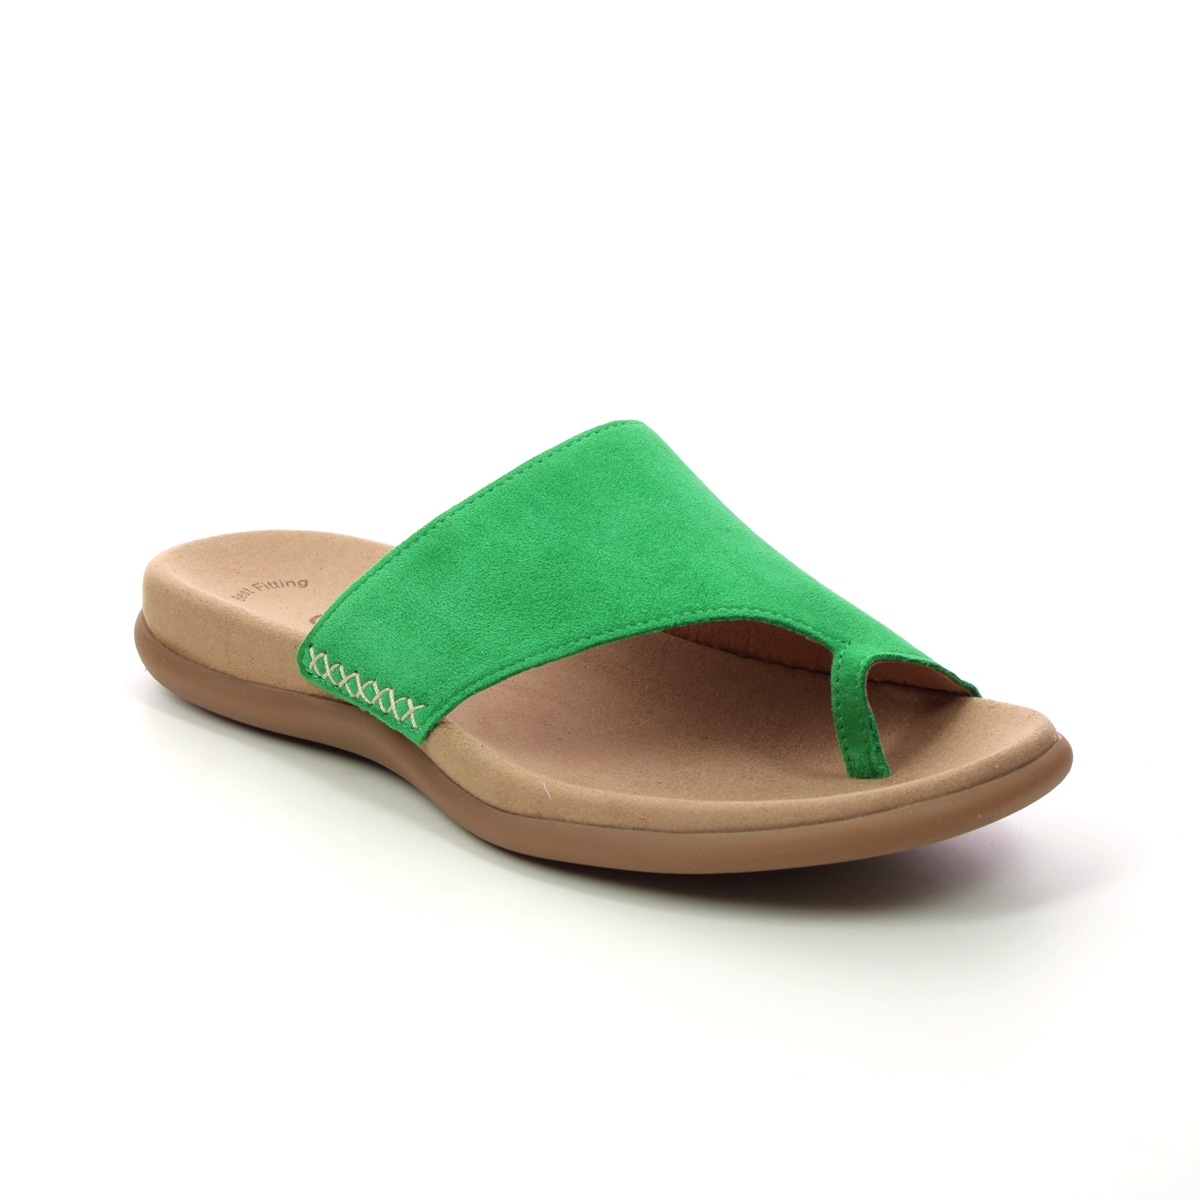 Gabor Lanzarote Green Suede Womens Toe Post Sandals 23.700.11 in a Plain Leather in Size 40